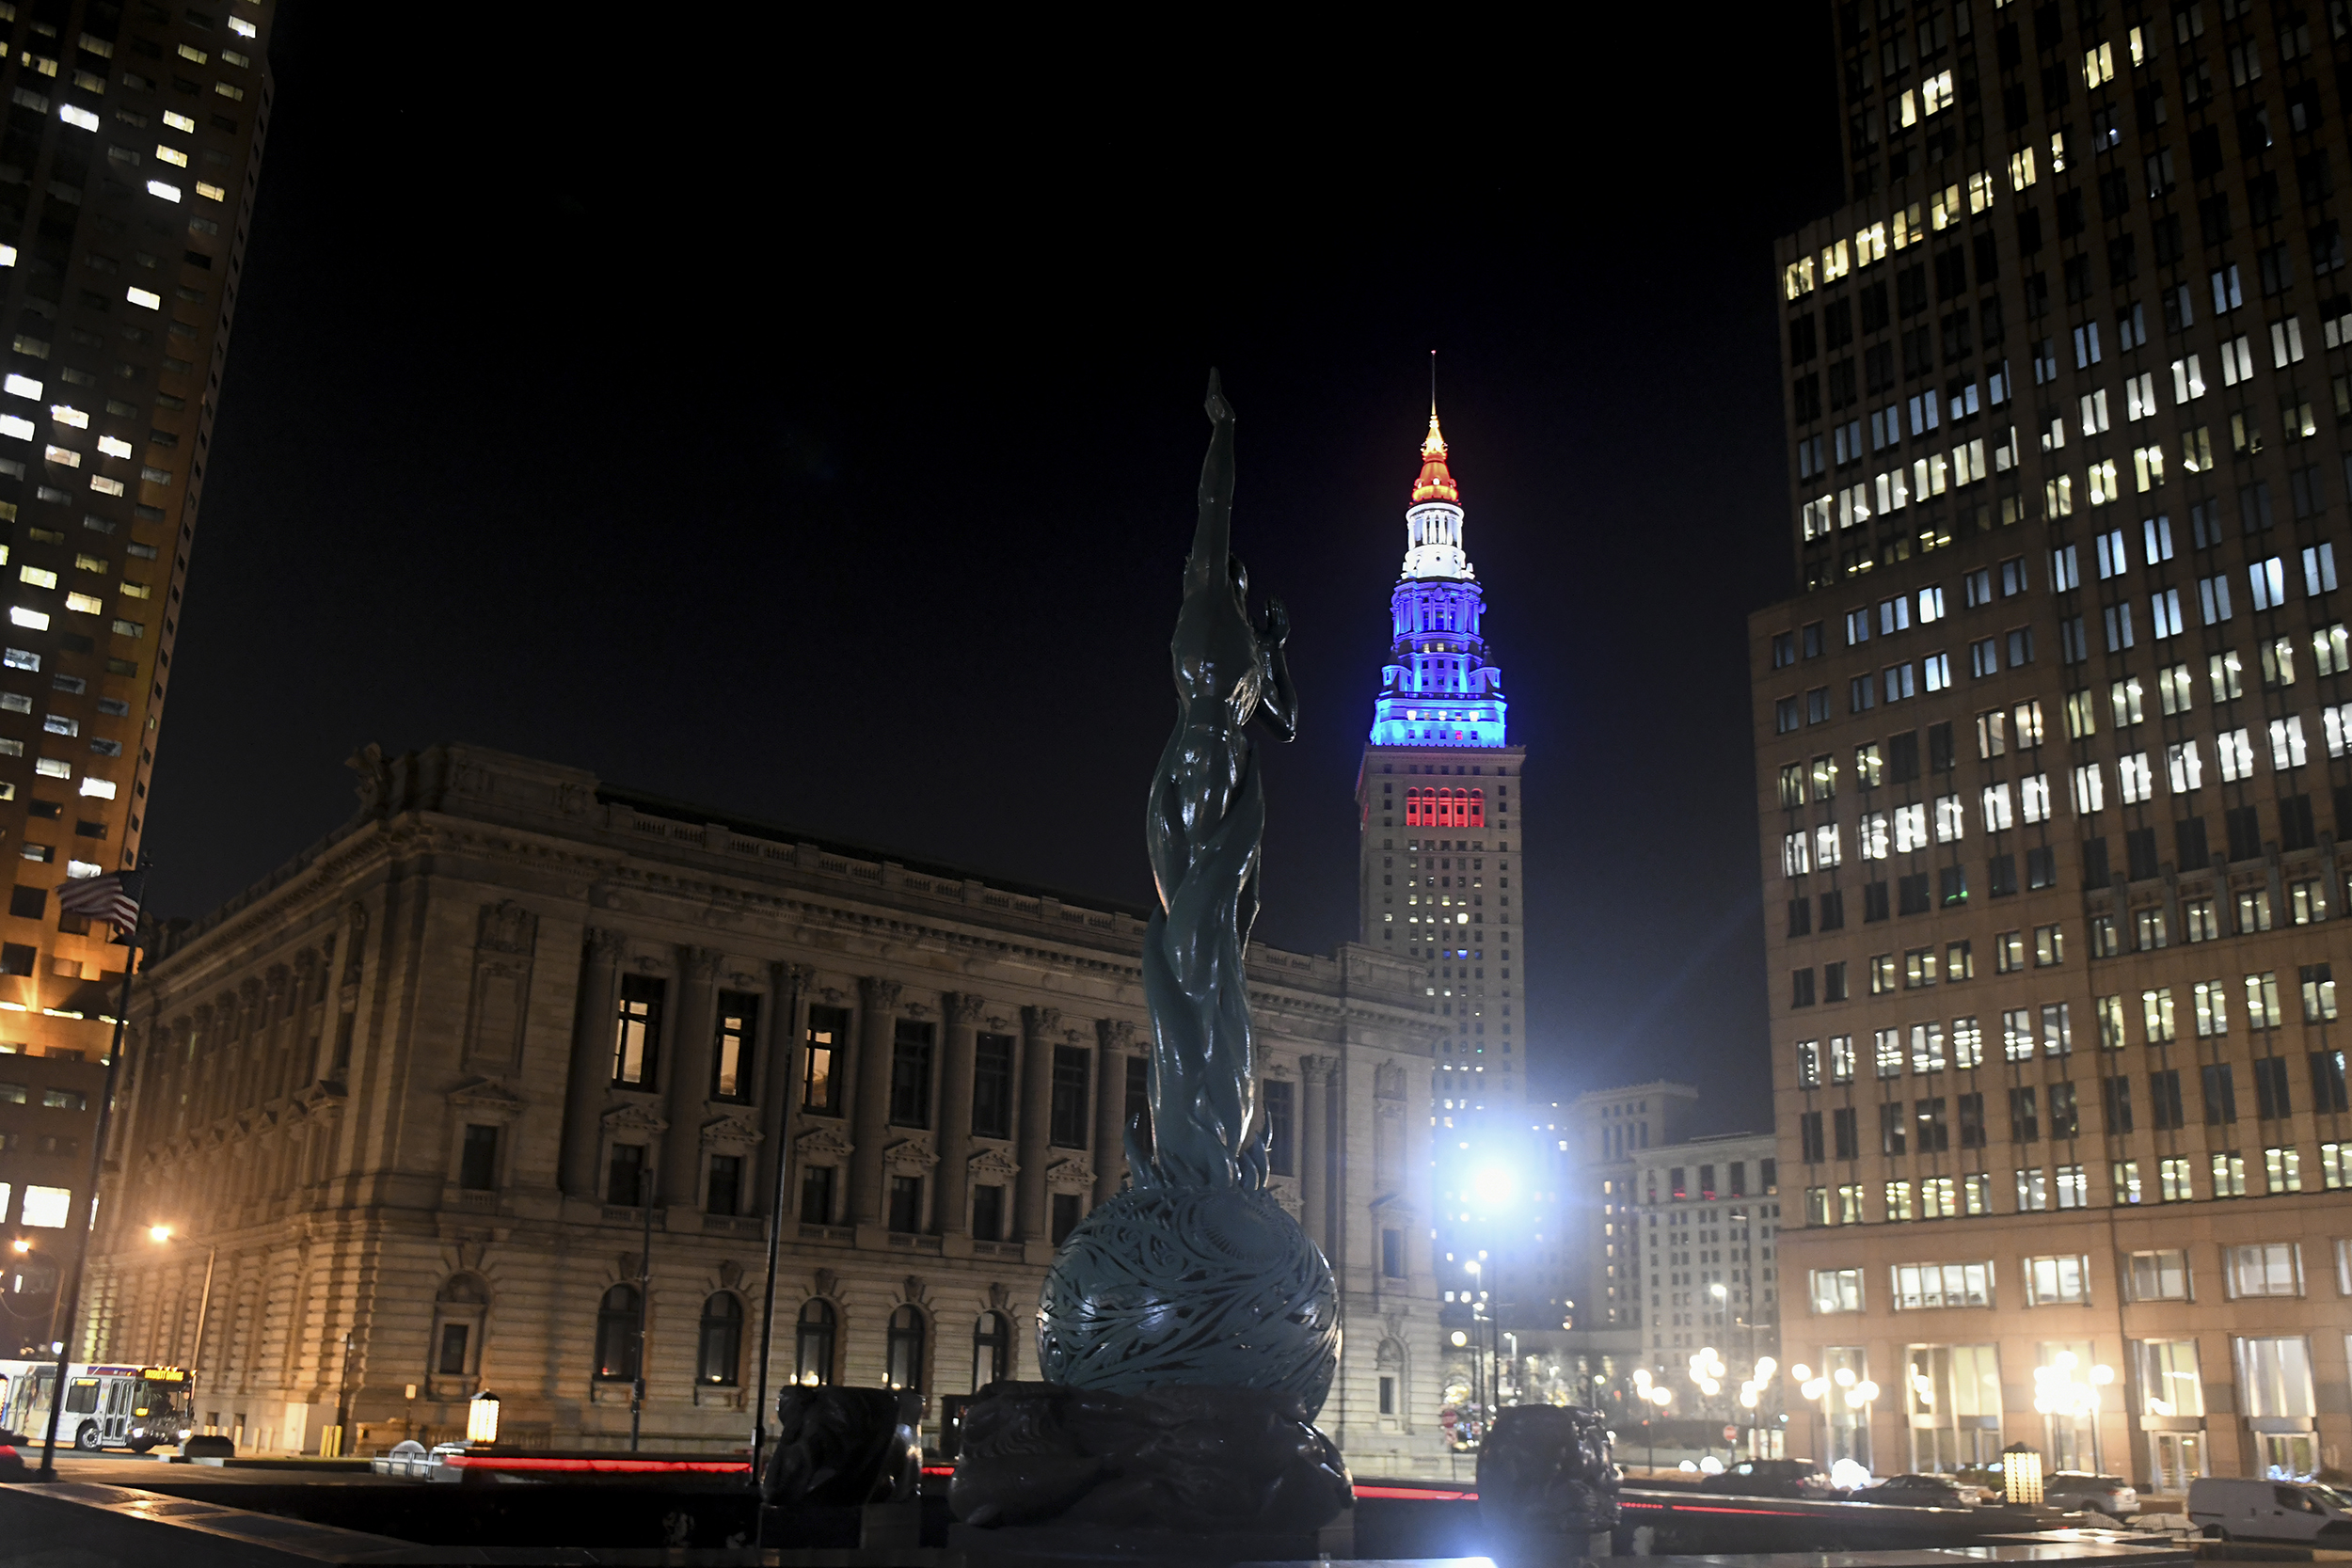 Terminal Tower, other downtown buildings at night.